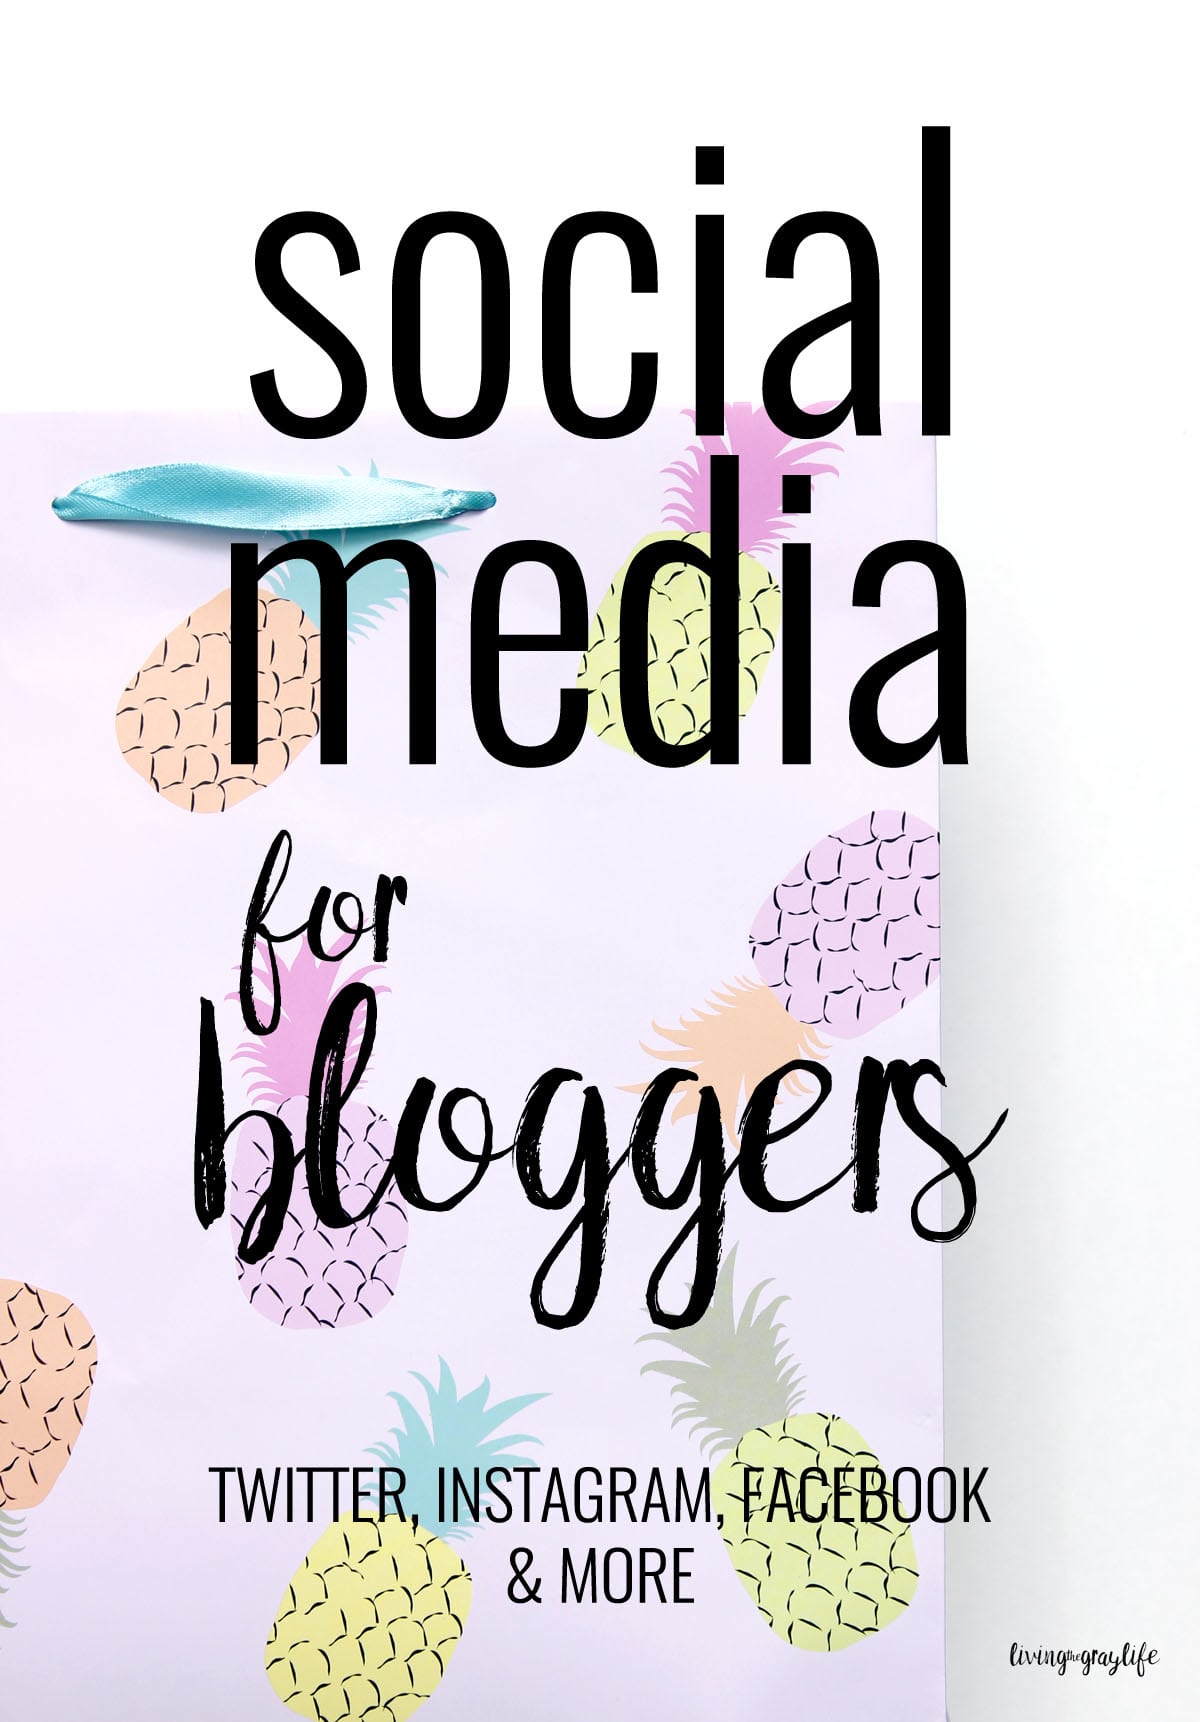 Struggling to grasp social media as a blogger? Follow these simple tips to help grow your social platforms!